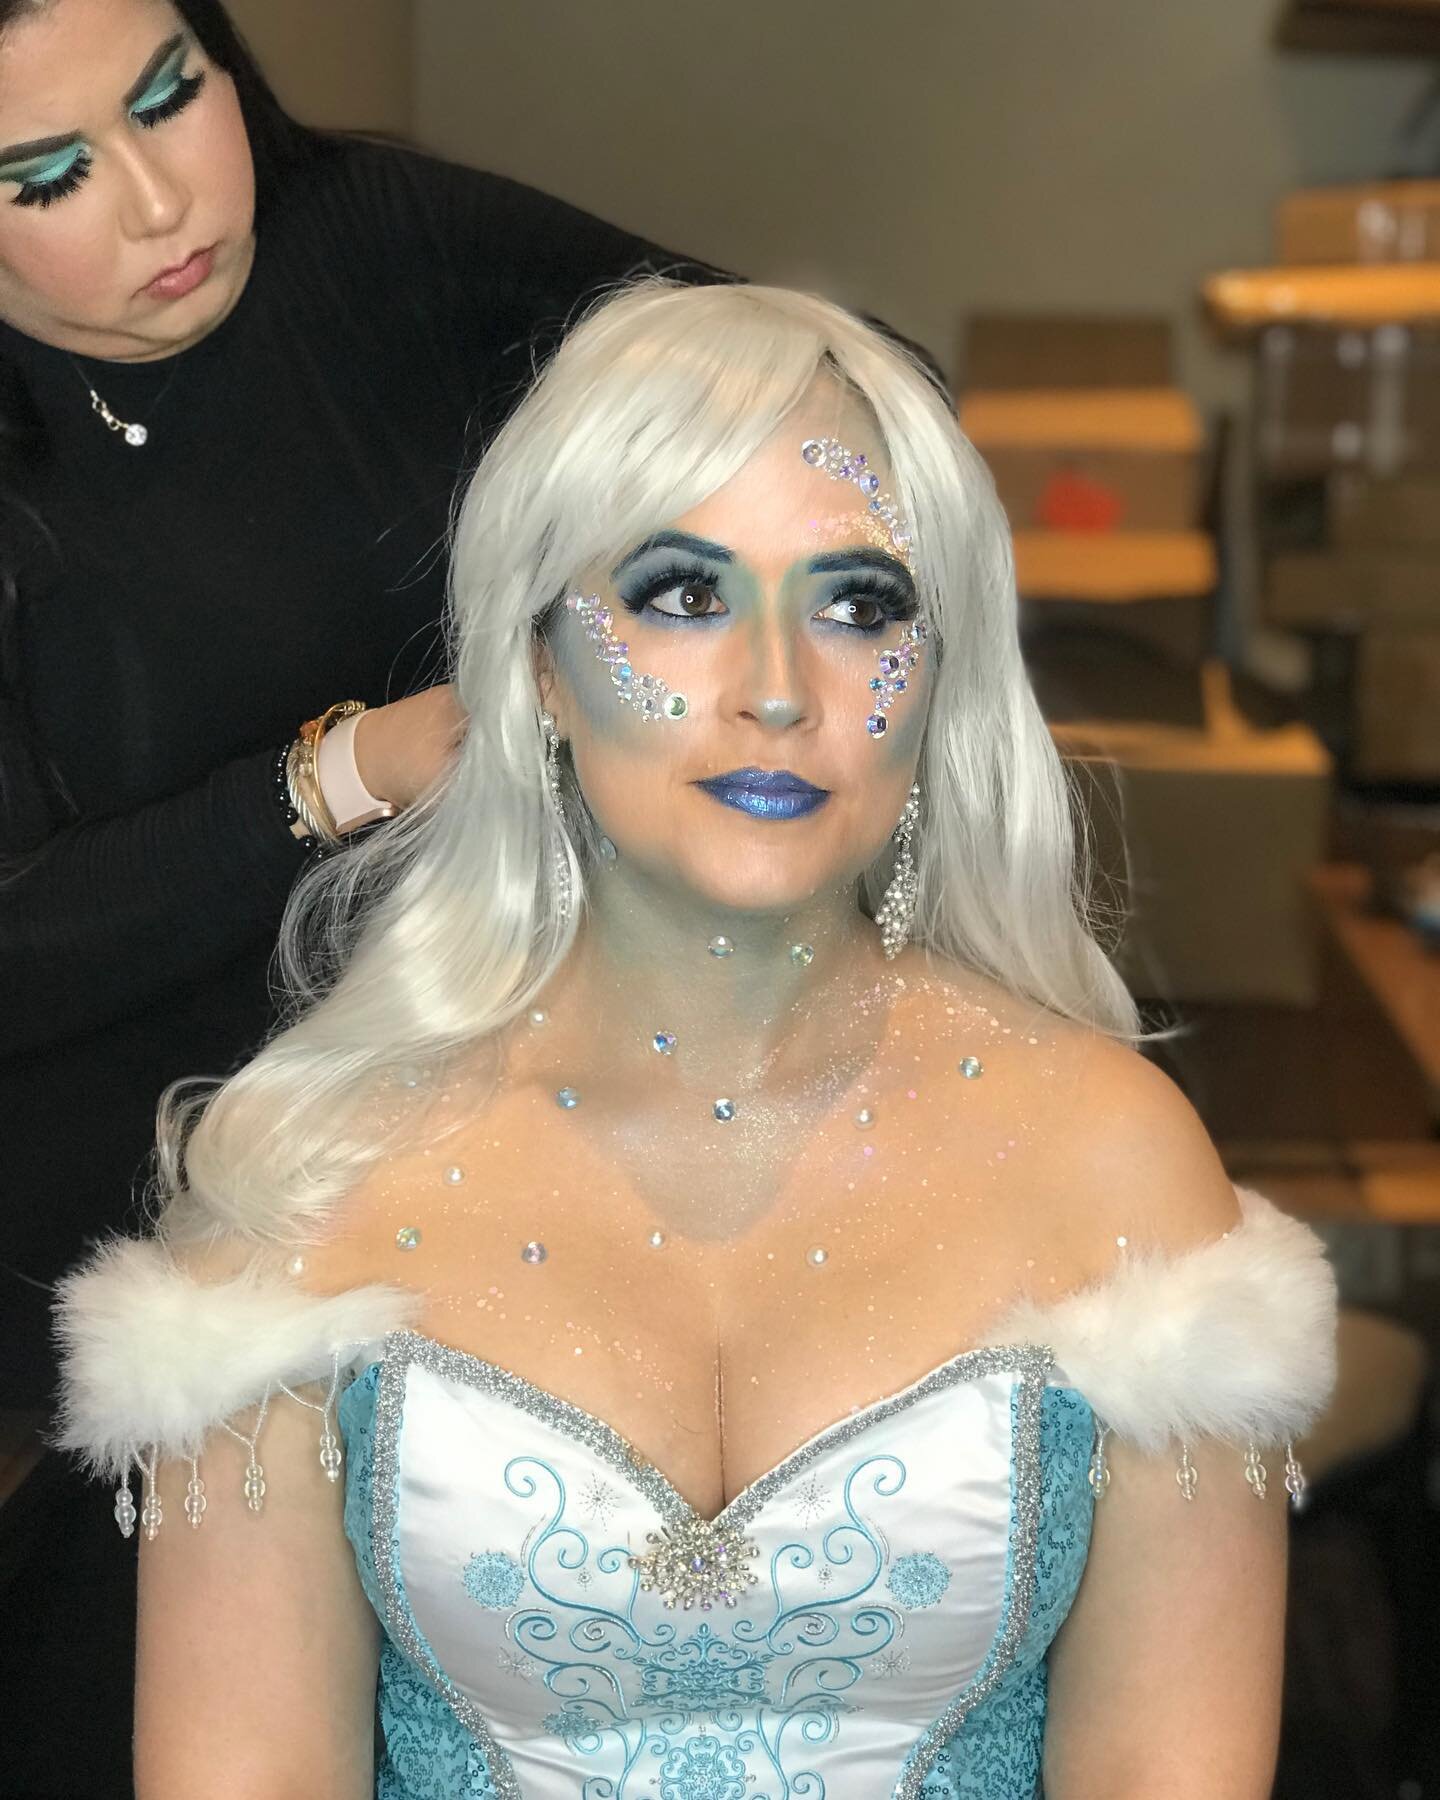 Being transformed into an Ice Queen for my electric violin performance of Dance of the Sugar Plum Fairy. Incredible makeup artist @beautybyclaudia_888